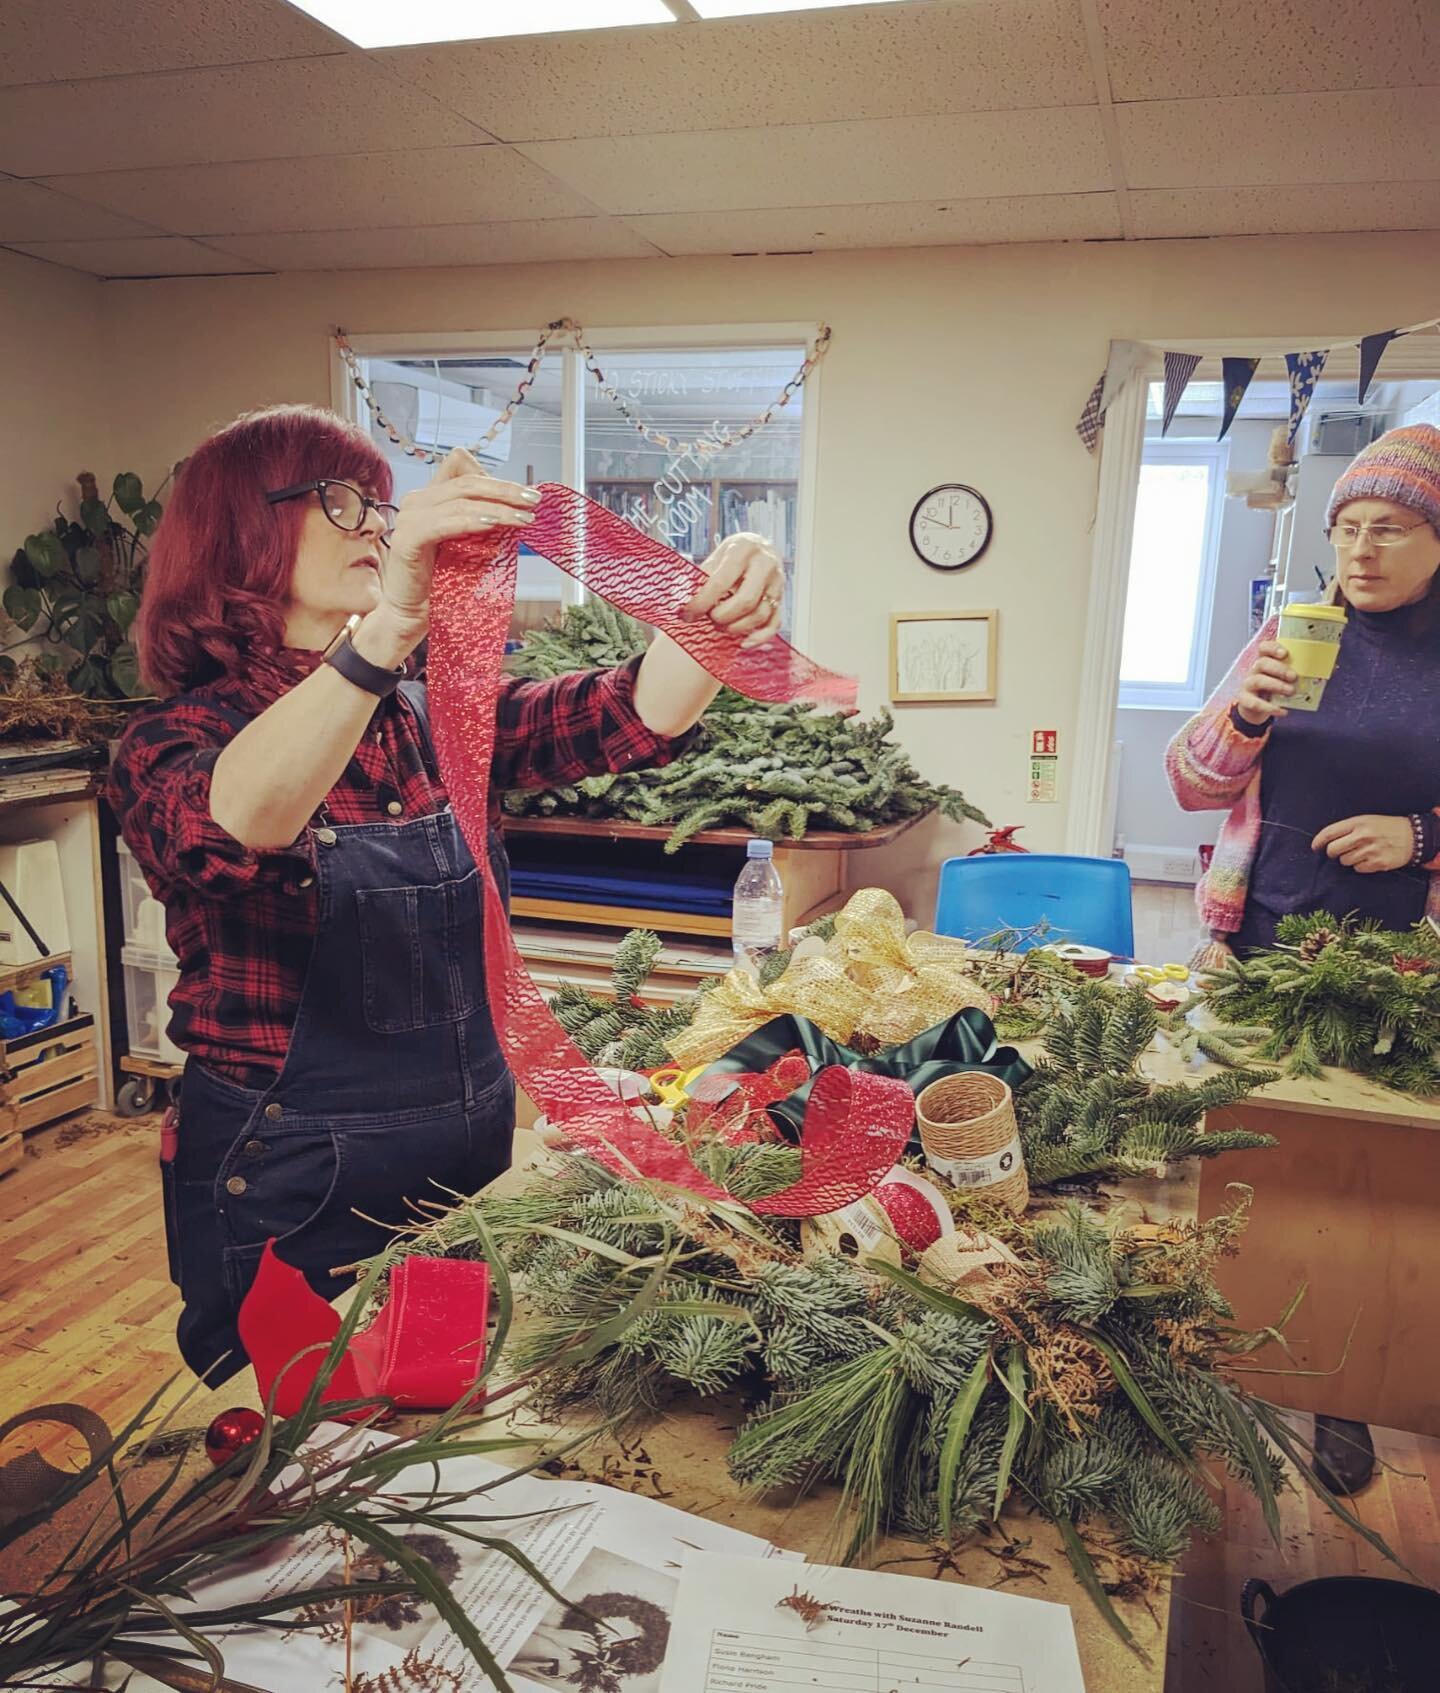 Delighted to announce I will be teaching floristry for beginners at @oaklandscollege 7-9pm from 19th April 2023.

This 6 week course - with a sustainable ethos - will cover everything from table design, flower crowns to hand tied bouquets.

Booking v